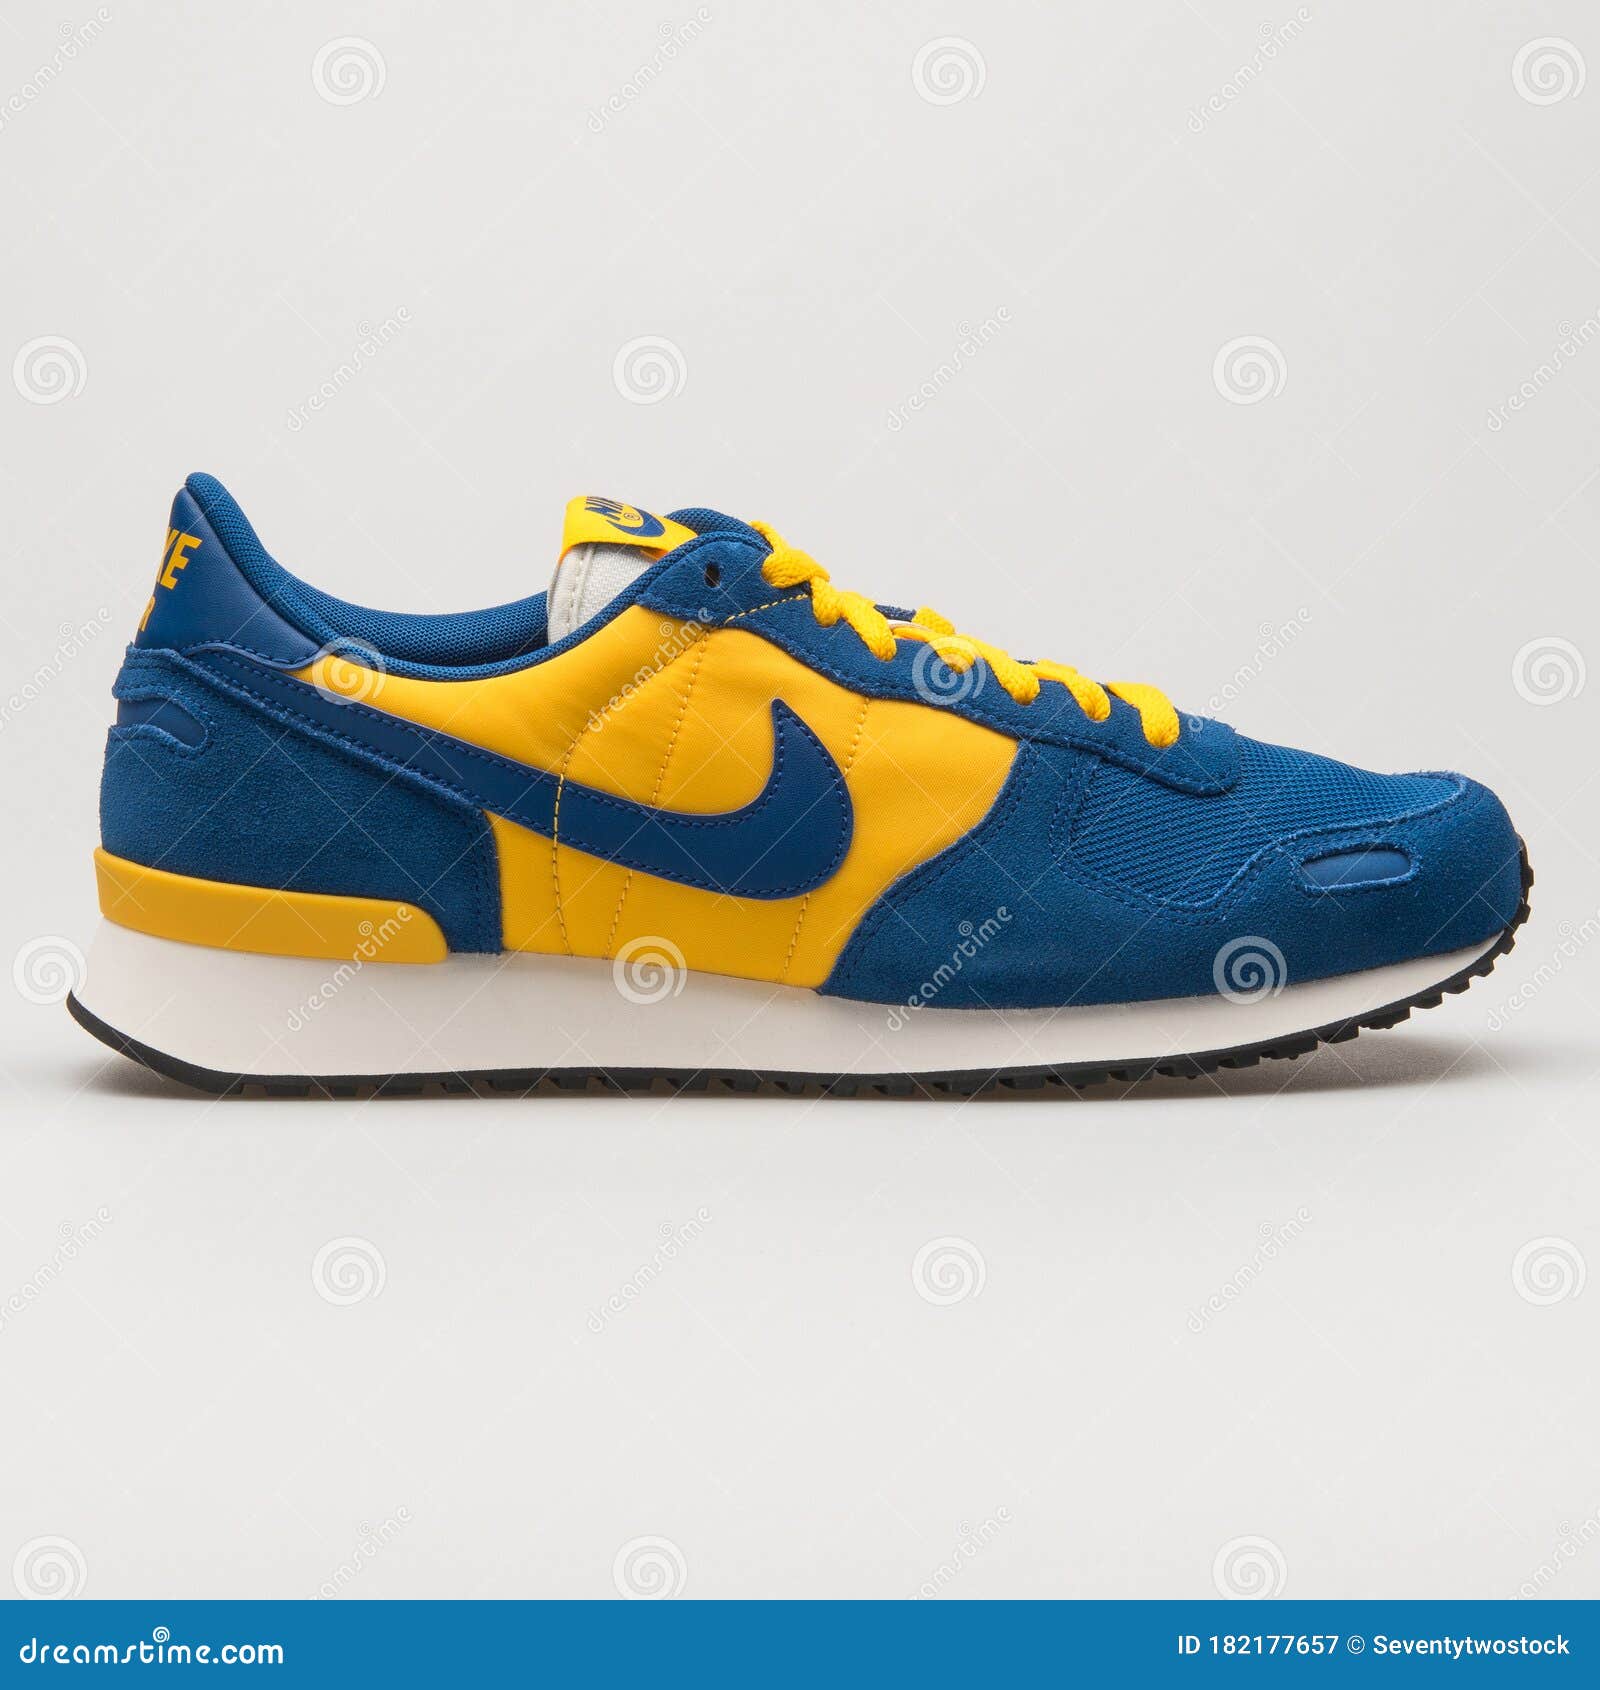 Schaap schaak wagon Nike Air VRTX Blue, Yellow and White Sneaker Editorial Photography - Image  of product, activity: 182177657